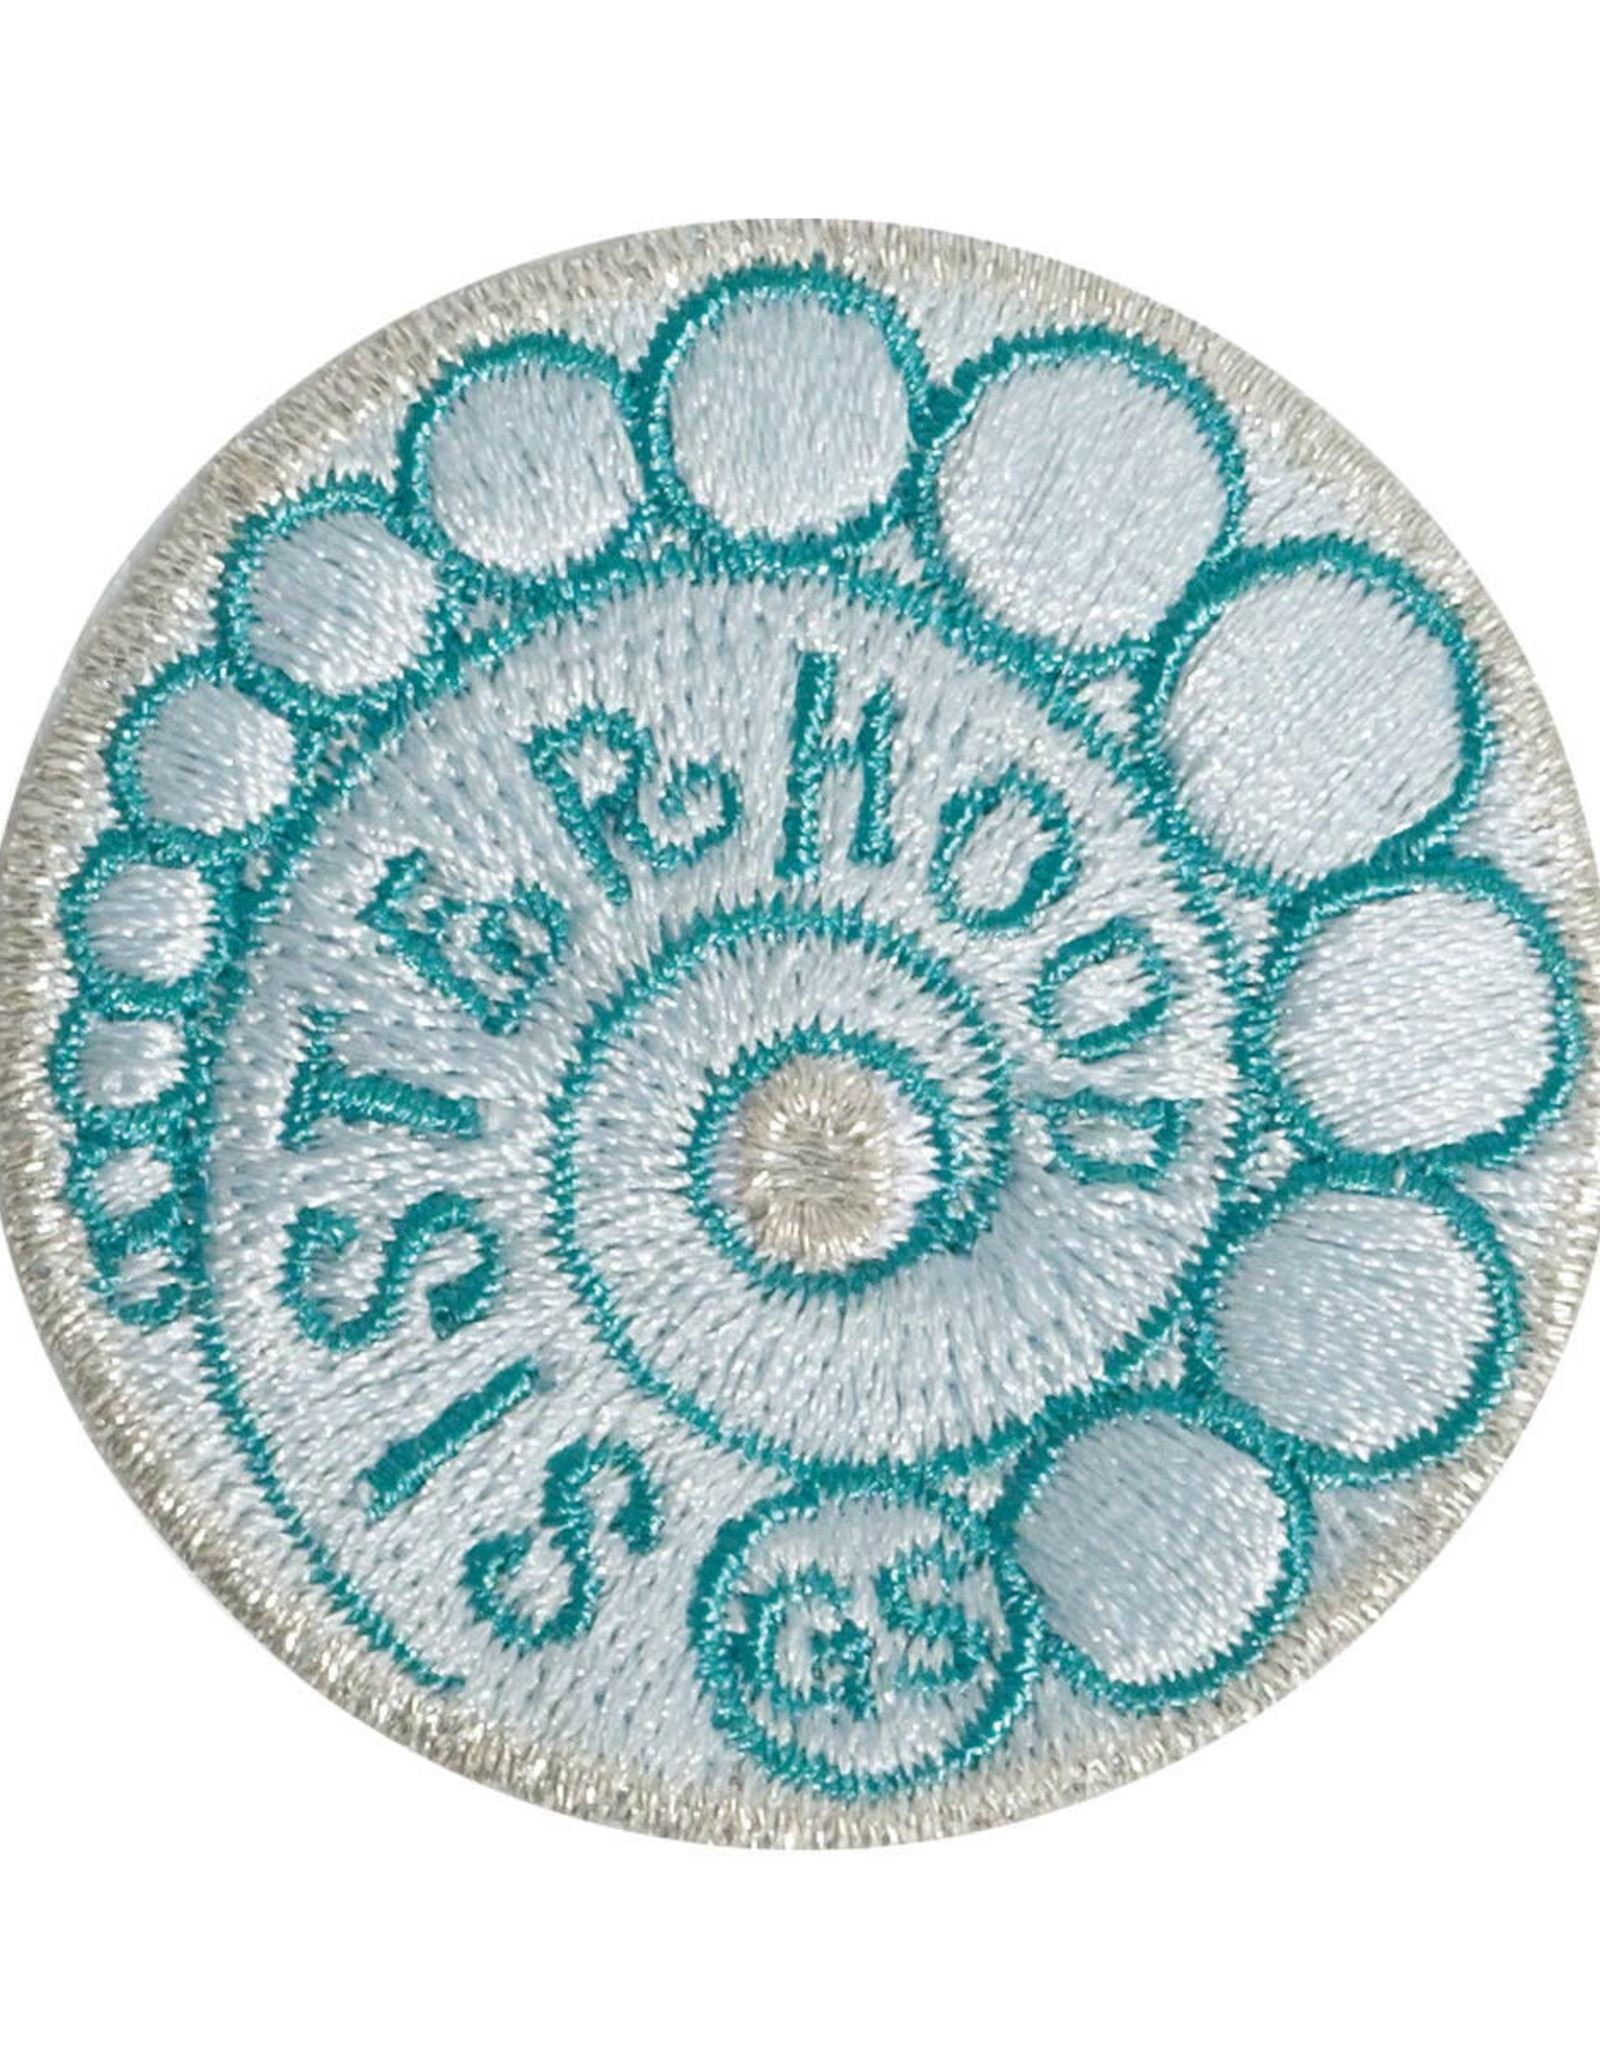 GIRL SCOUTS OF THE USA Senior Mission Sisterhood Award Patch